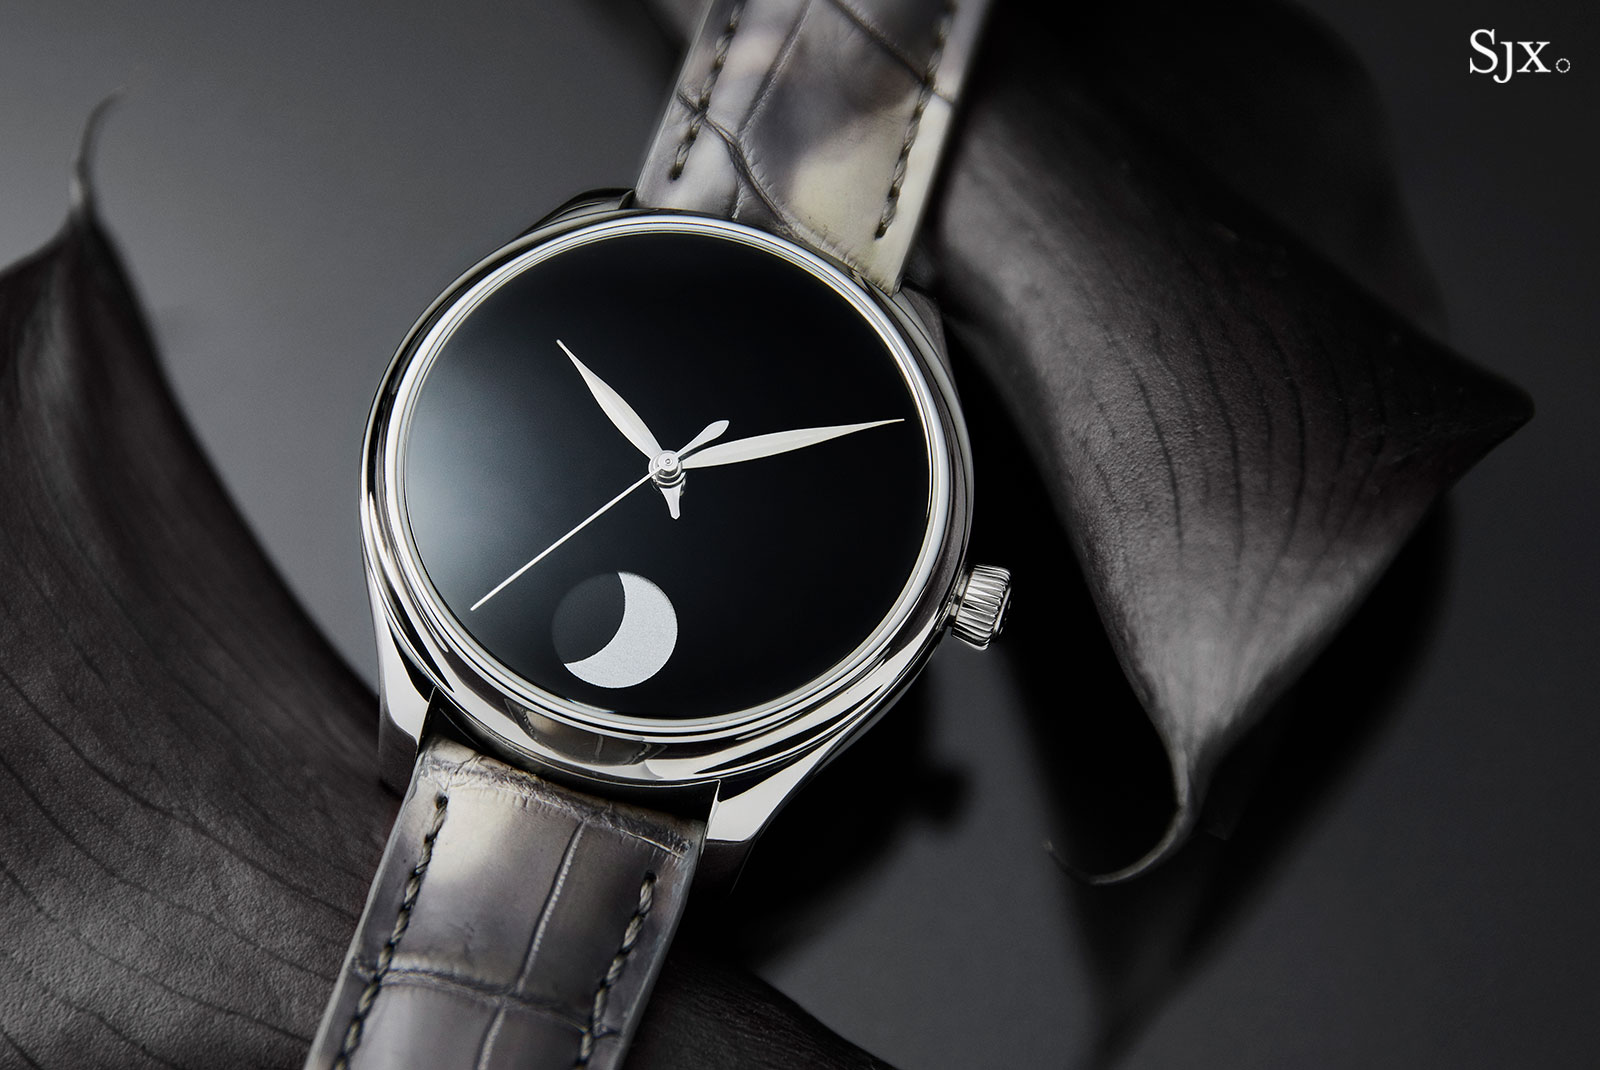 Hands-On with the H. Moser \u0026 Cie 